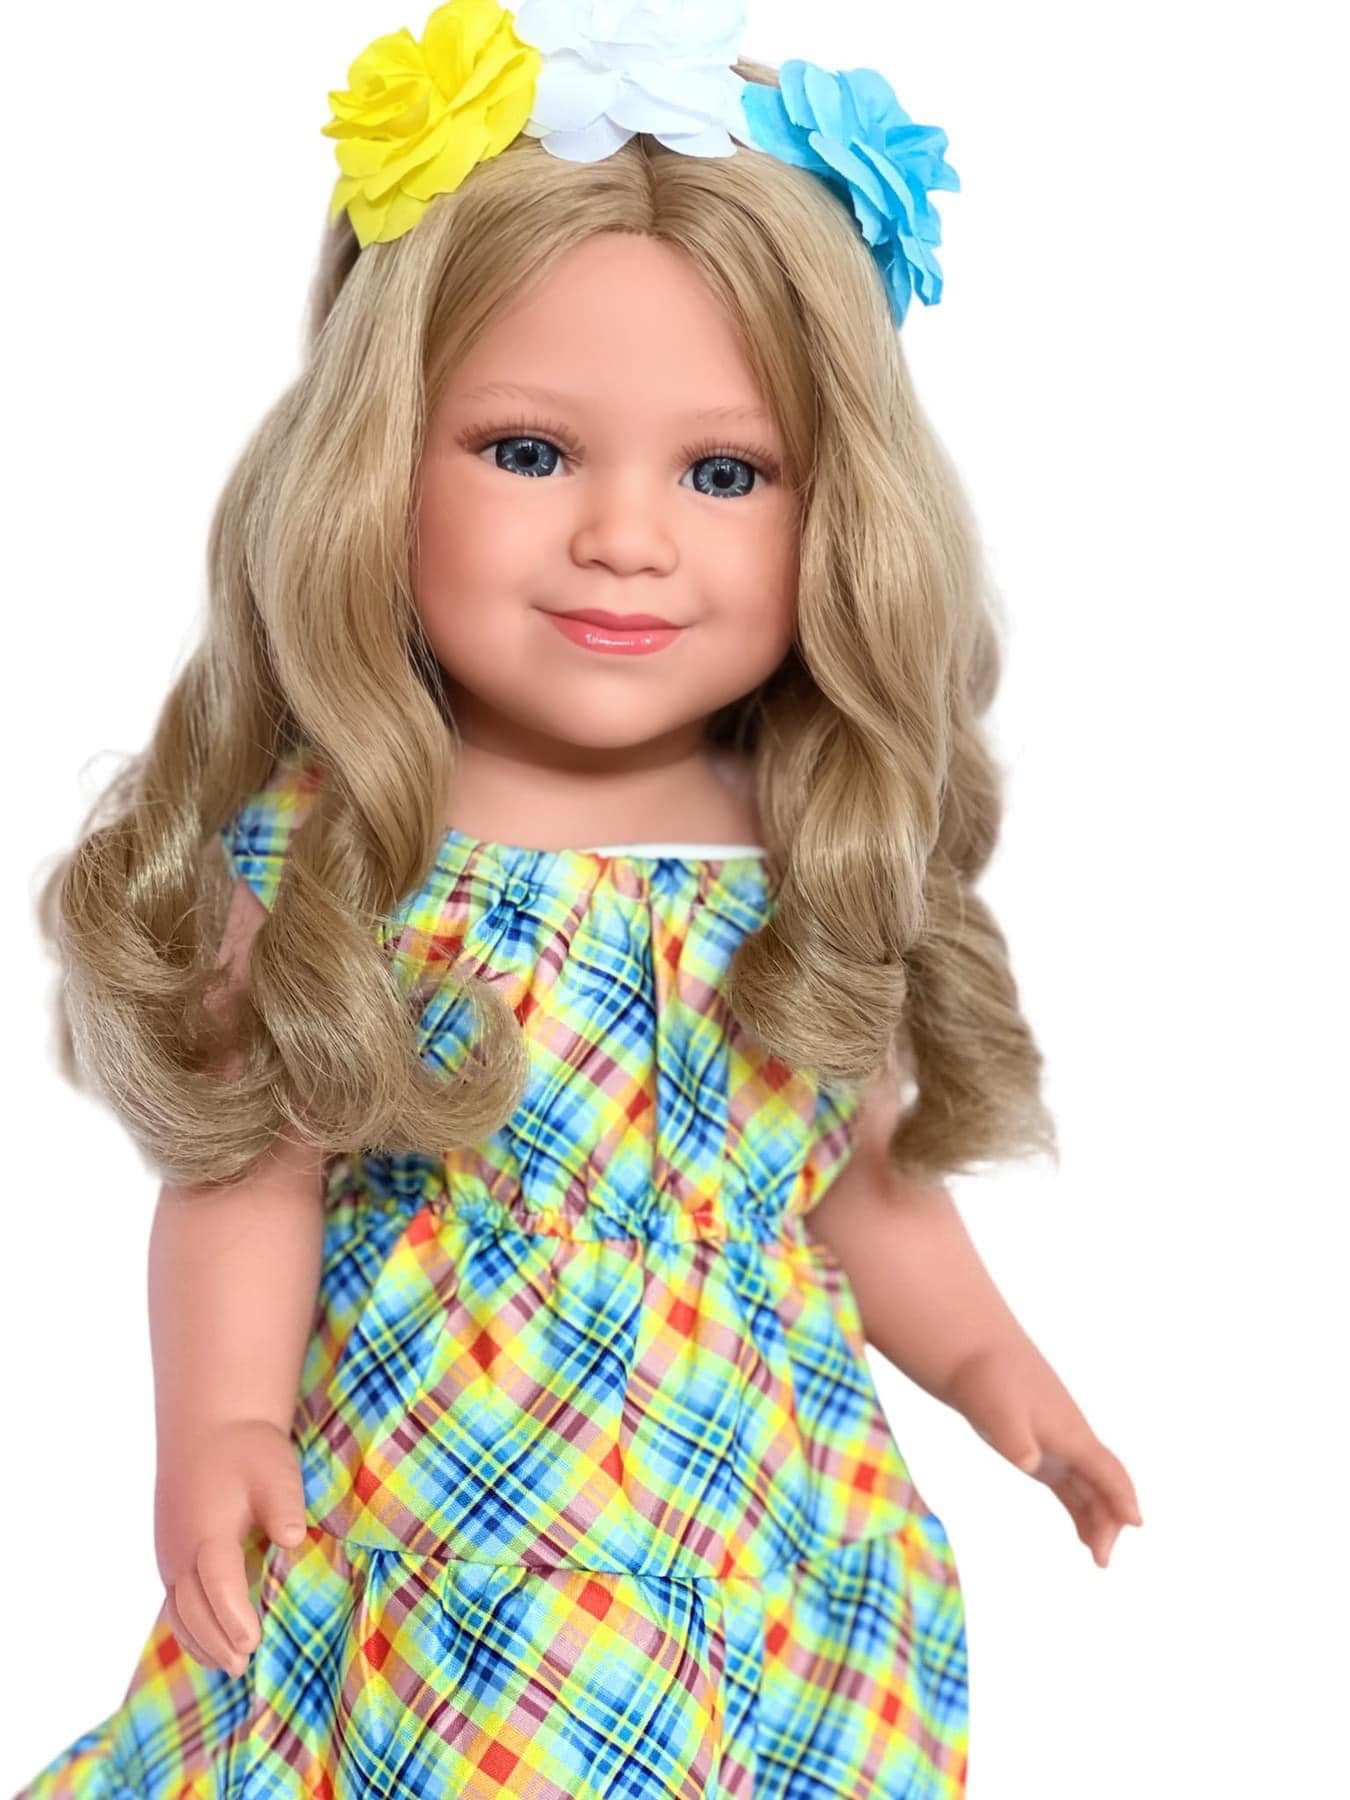 Introducing Weslynn &#x2122;: The Newest 18-Inch Doll with a Unique Heritage and Passion for Music